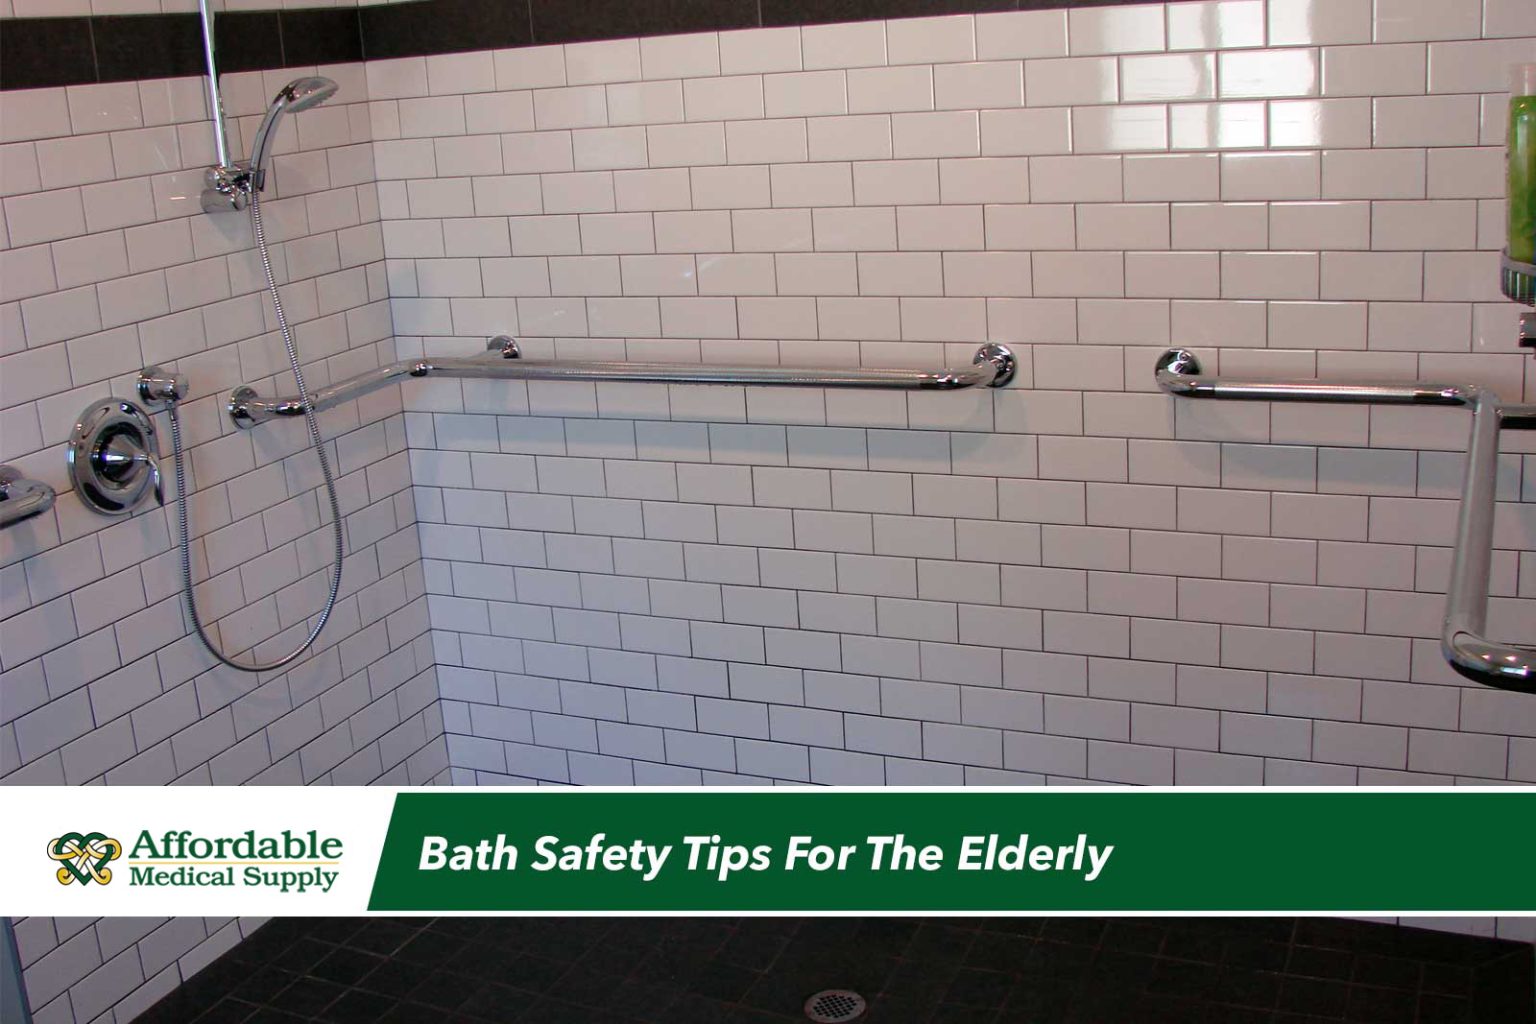 5 Simple Bath Safety Tips To Make Bathing Safe For The Elderly 